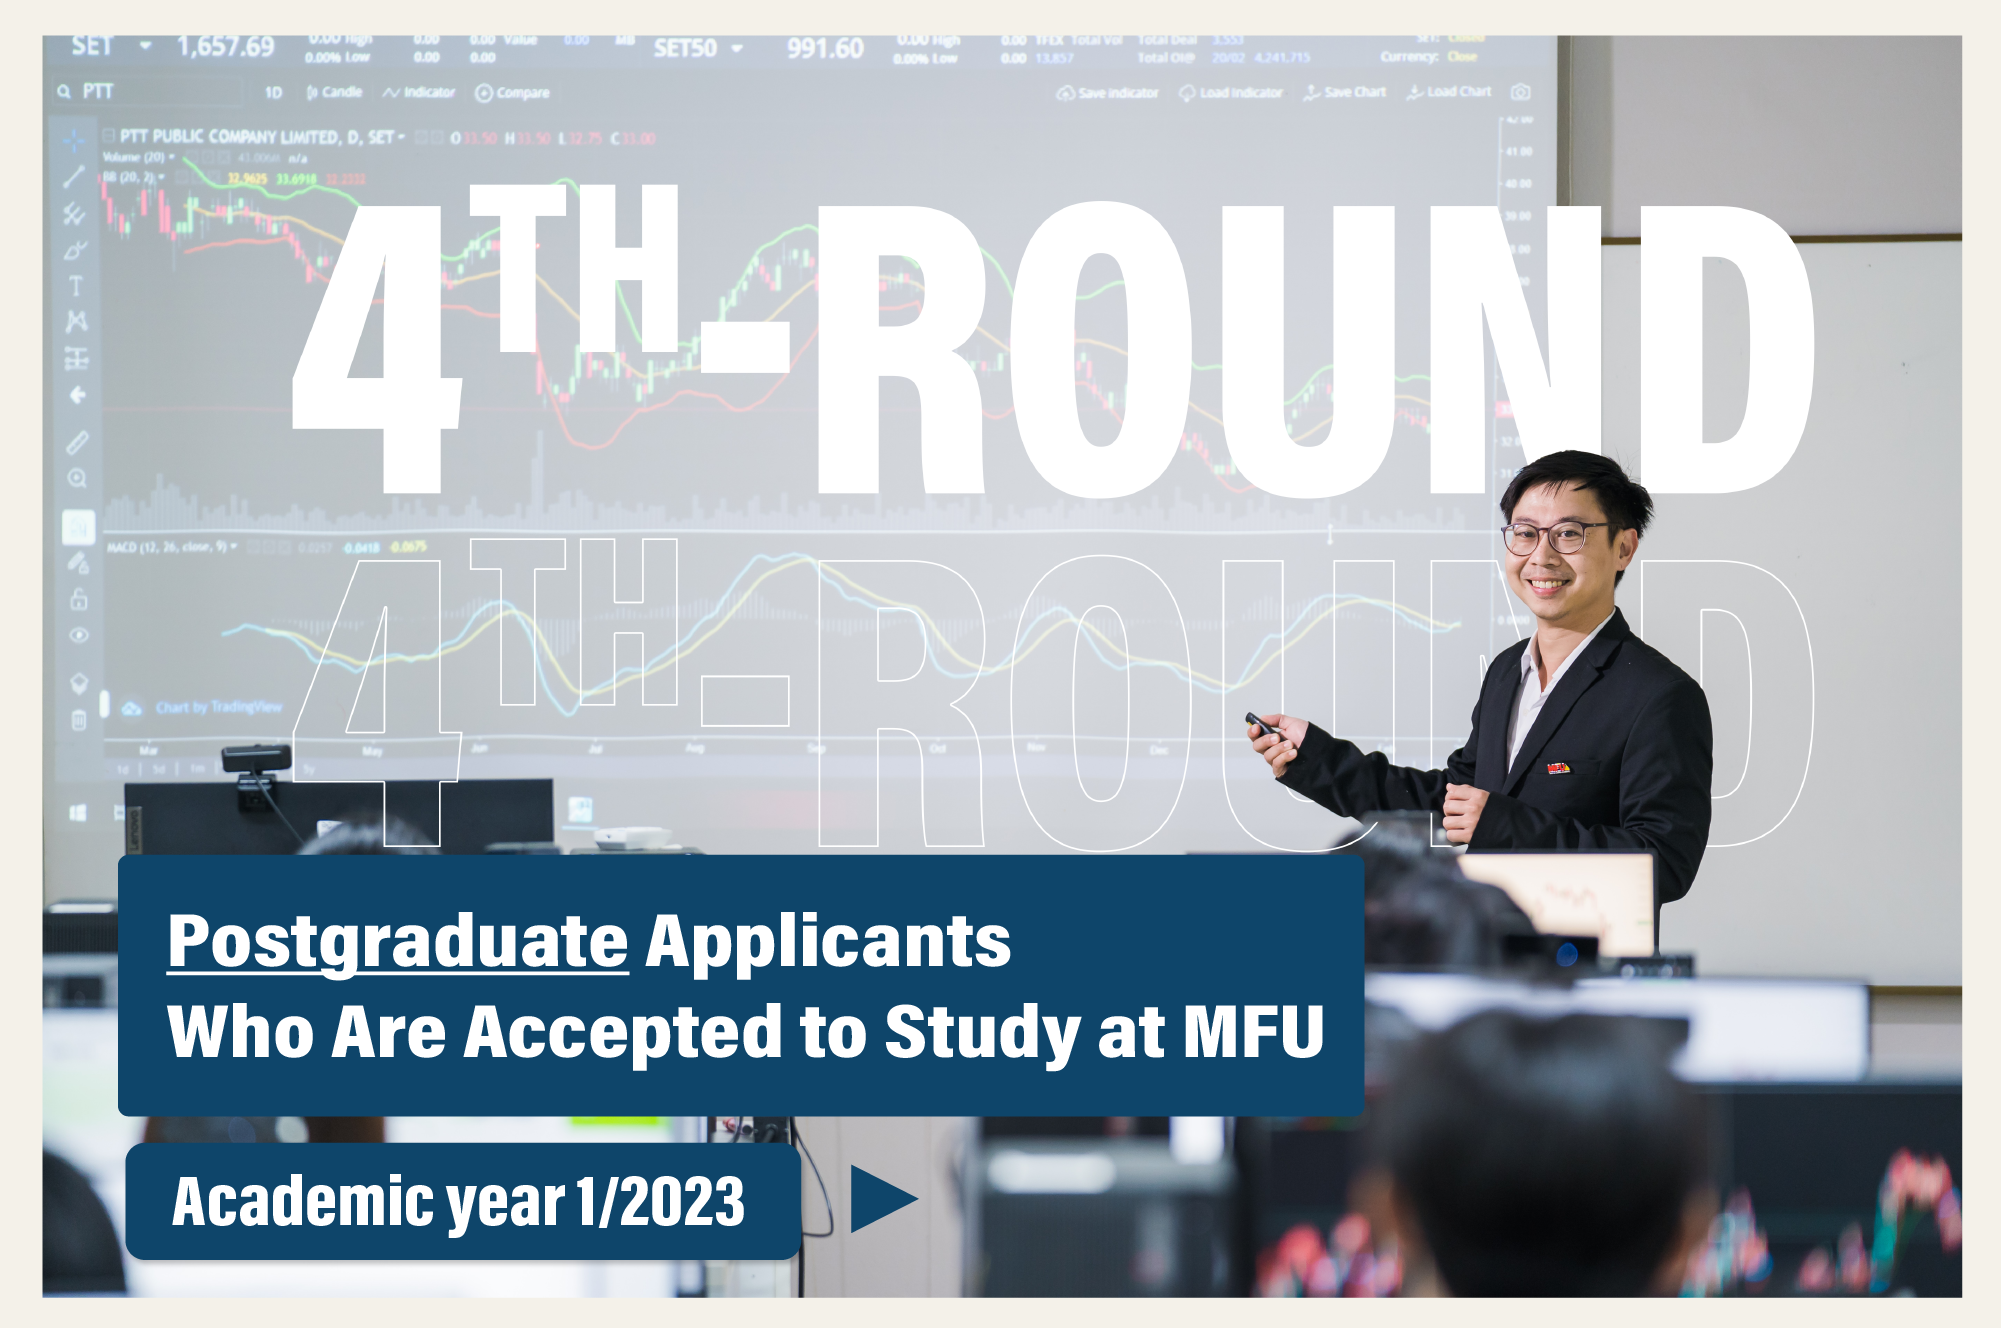  Announcement of the 4th-Round Postgraduate Applicants Who Are Accepted to Study at MFU